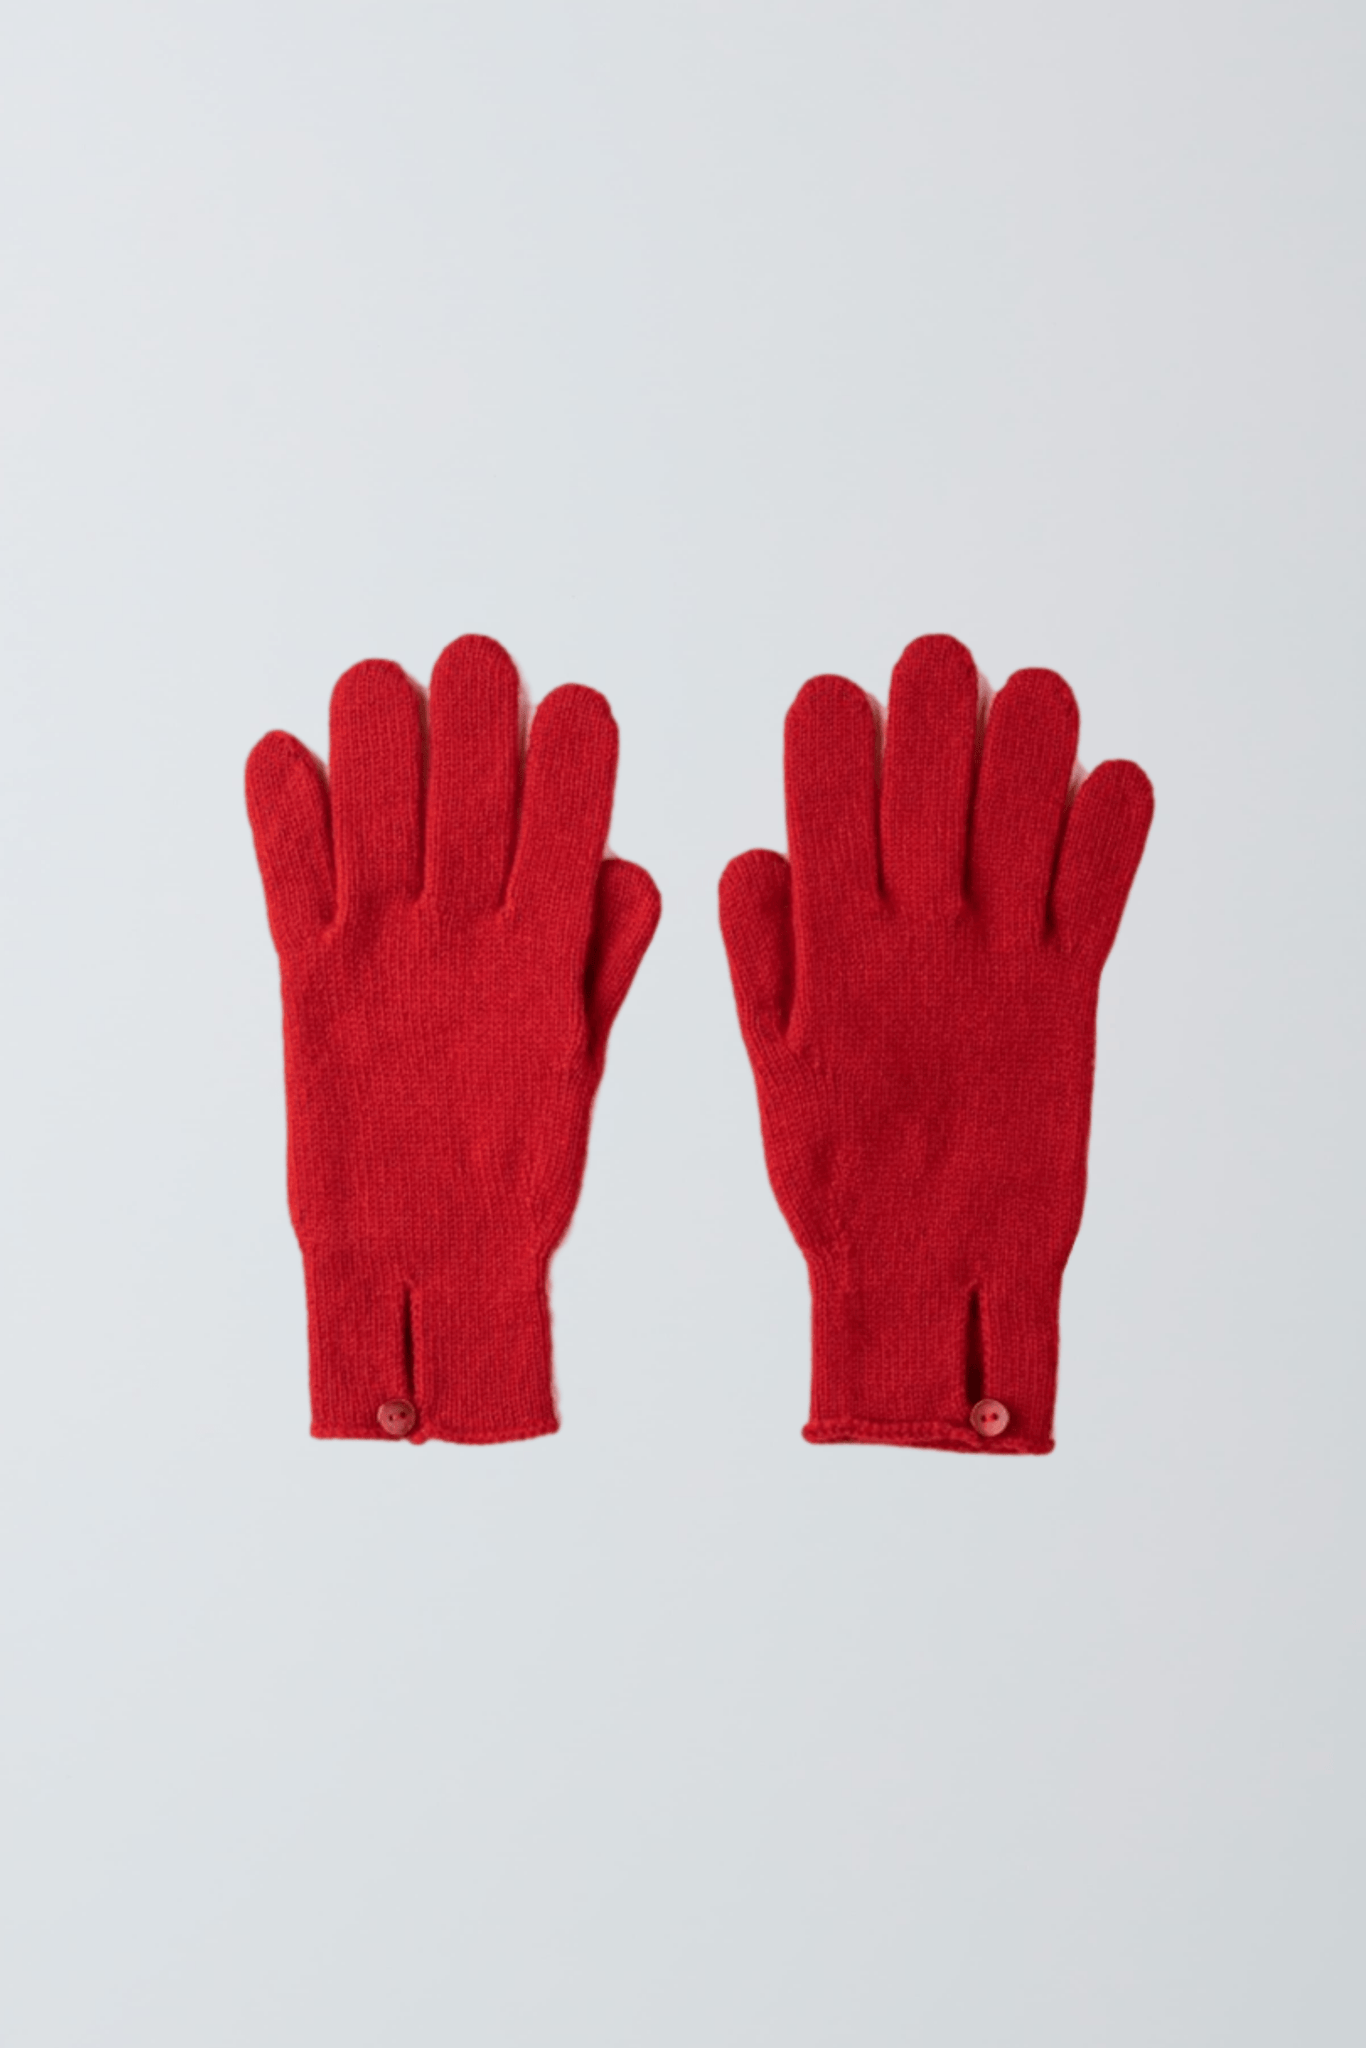 Scottish Cashmere Button Gloves - Women's Red Cashmere Gloves - Soft Accessories - Cashmere Accessories Lavender Hill Clothing